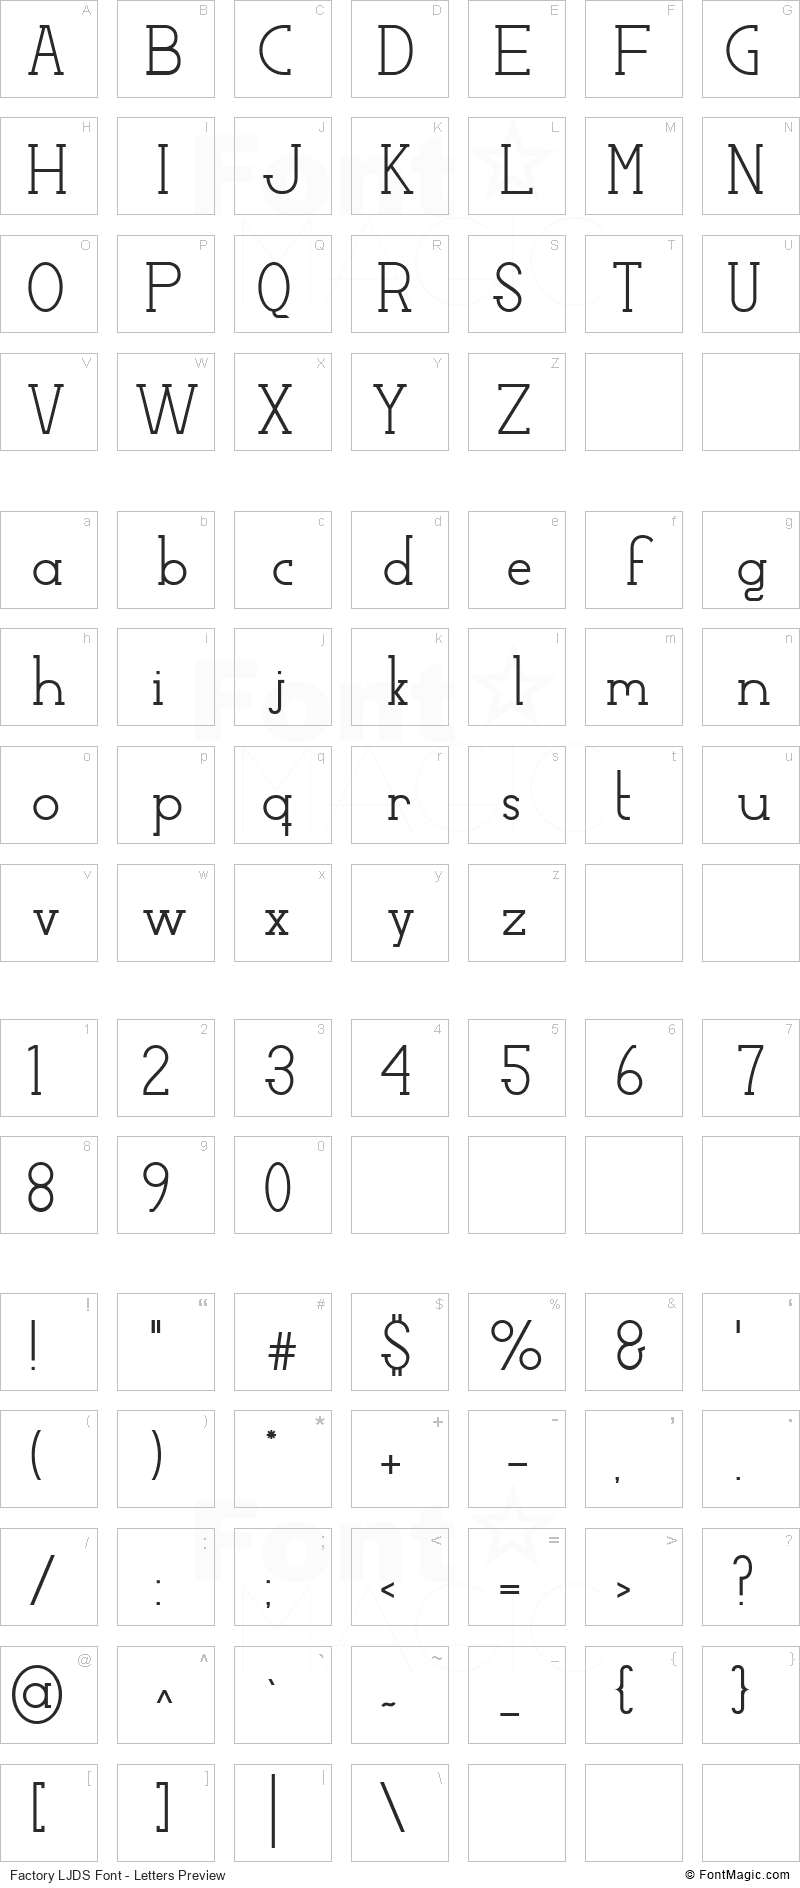 Factory LJDS Font - All Latters Preview Chart